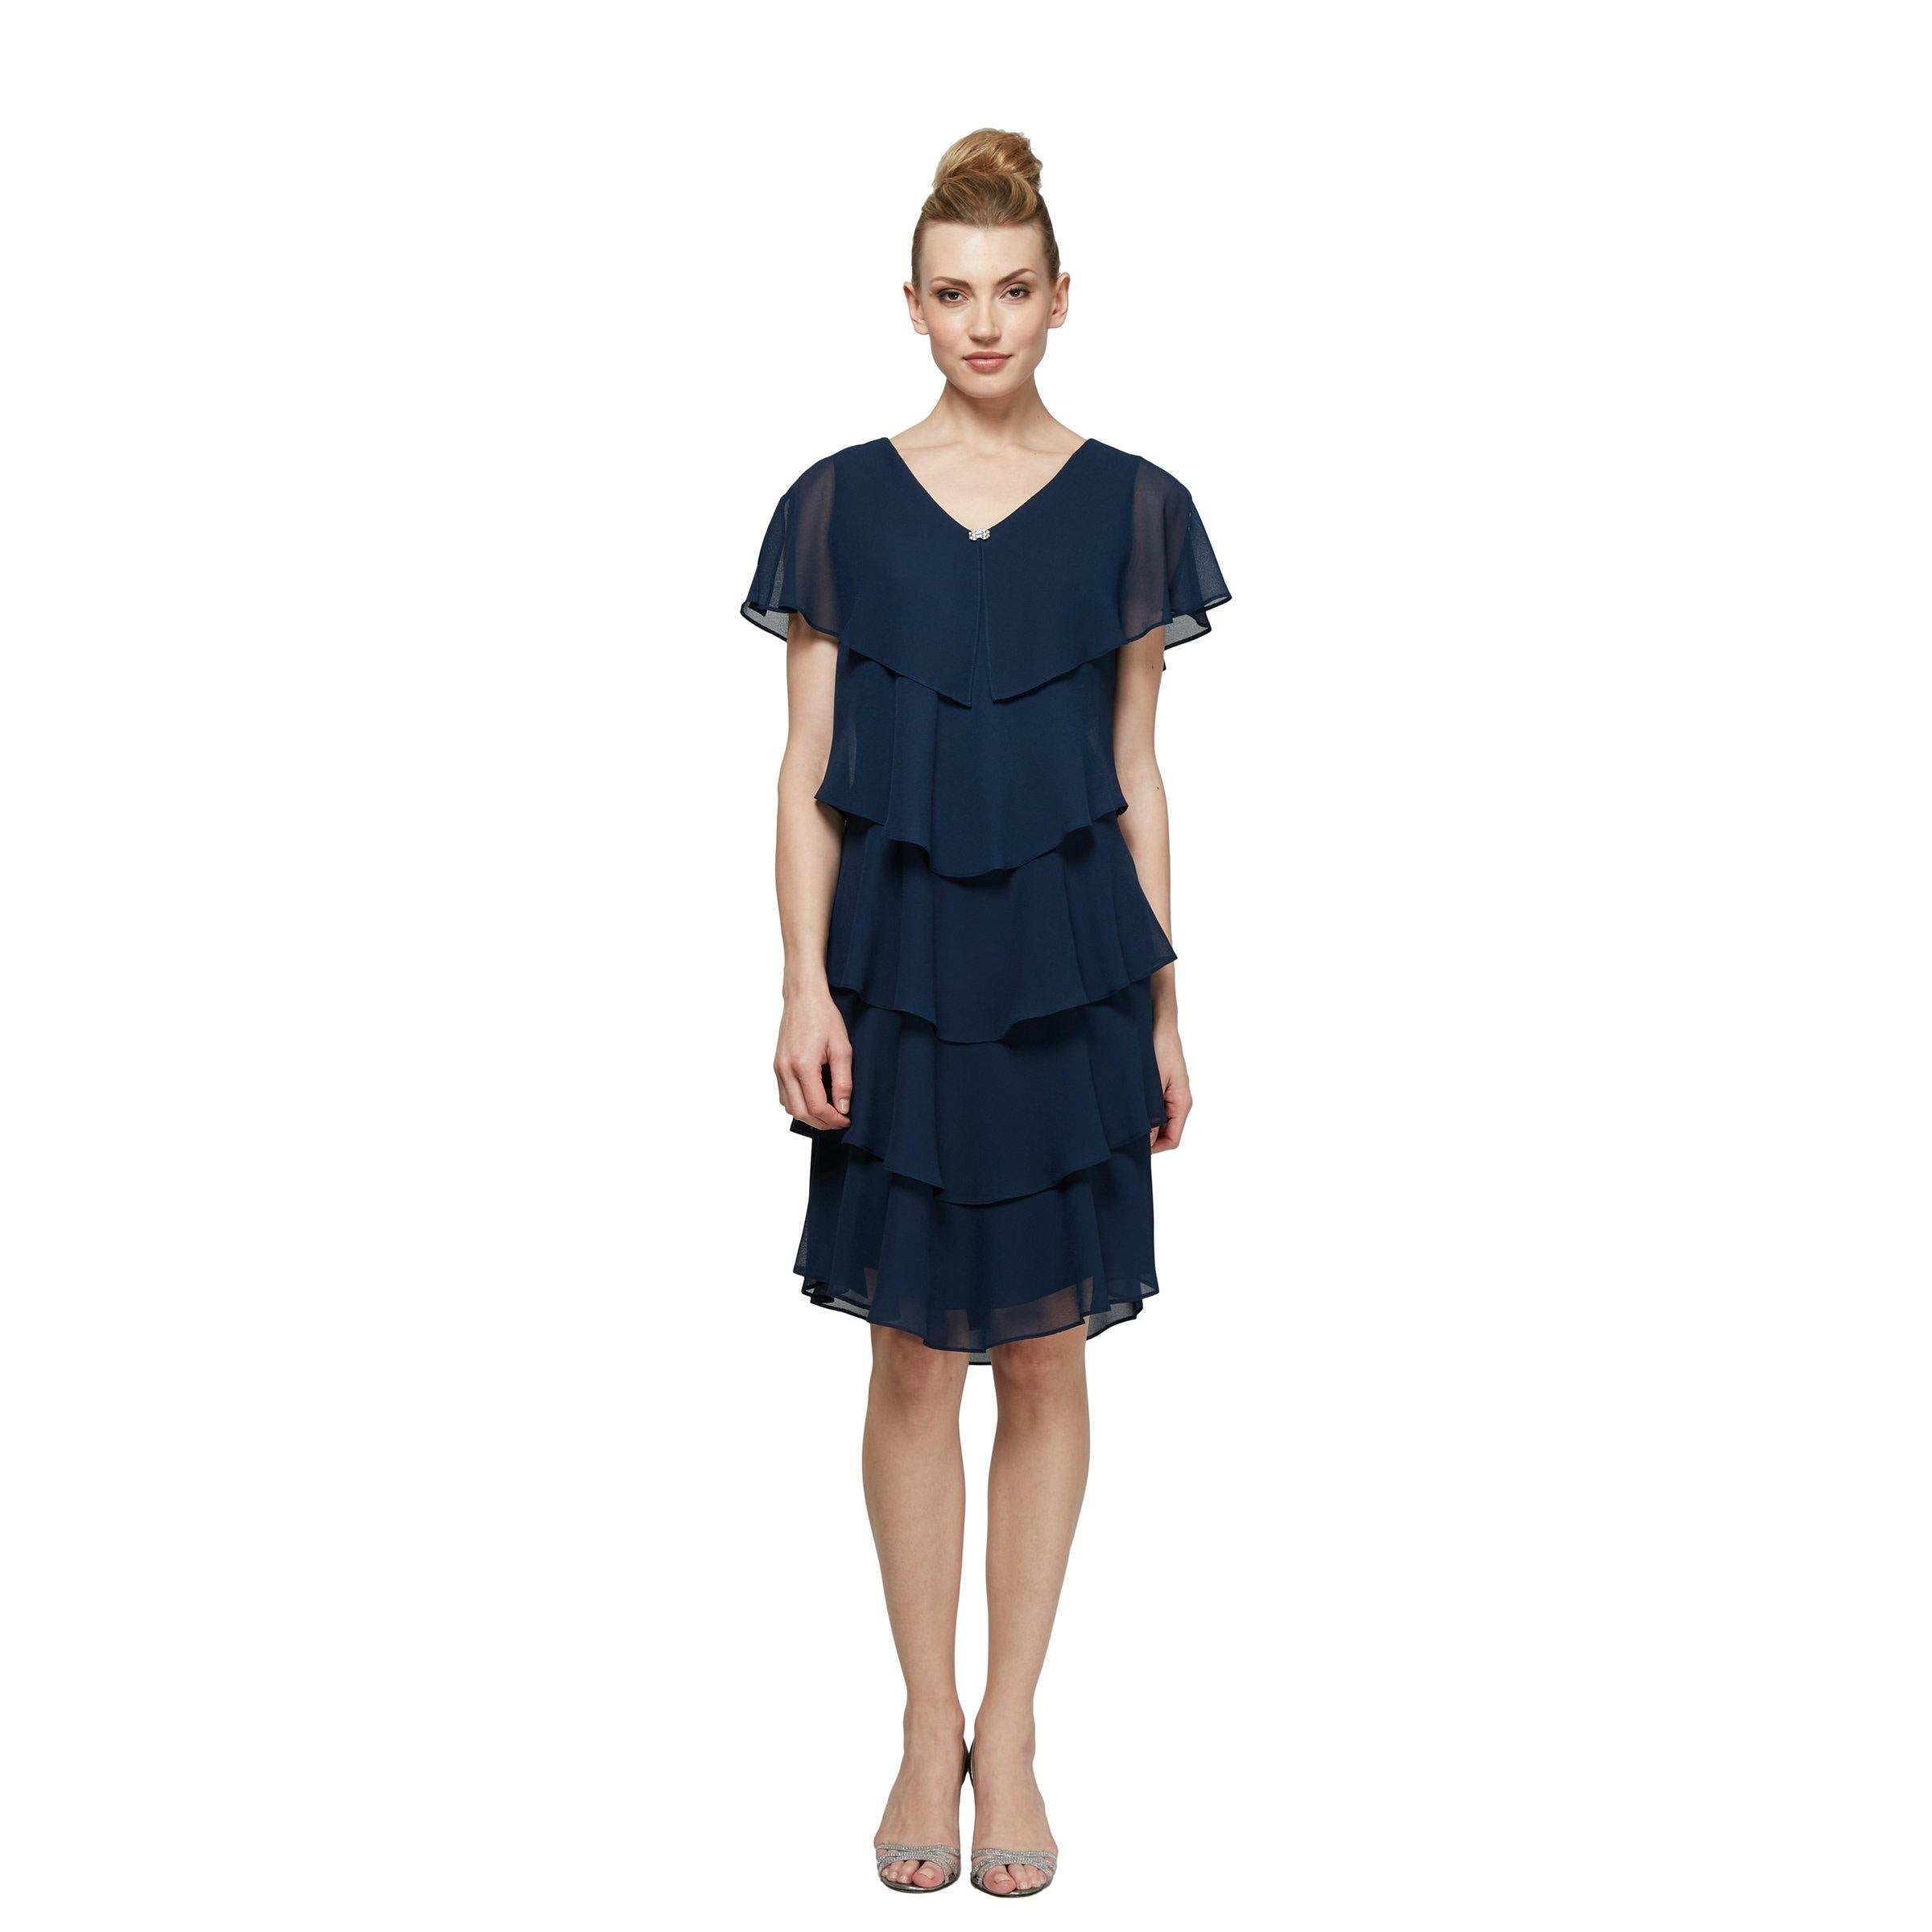 SL Fashions Short Tiered Chiffon Dress 117525 - The Dress Outlet